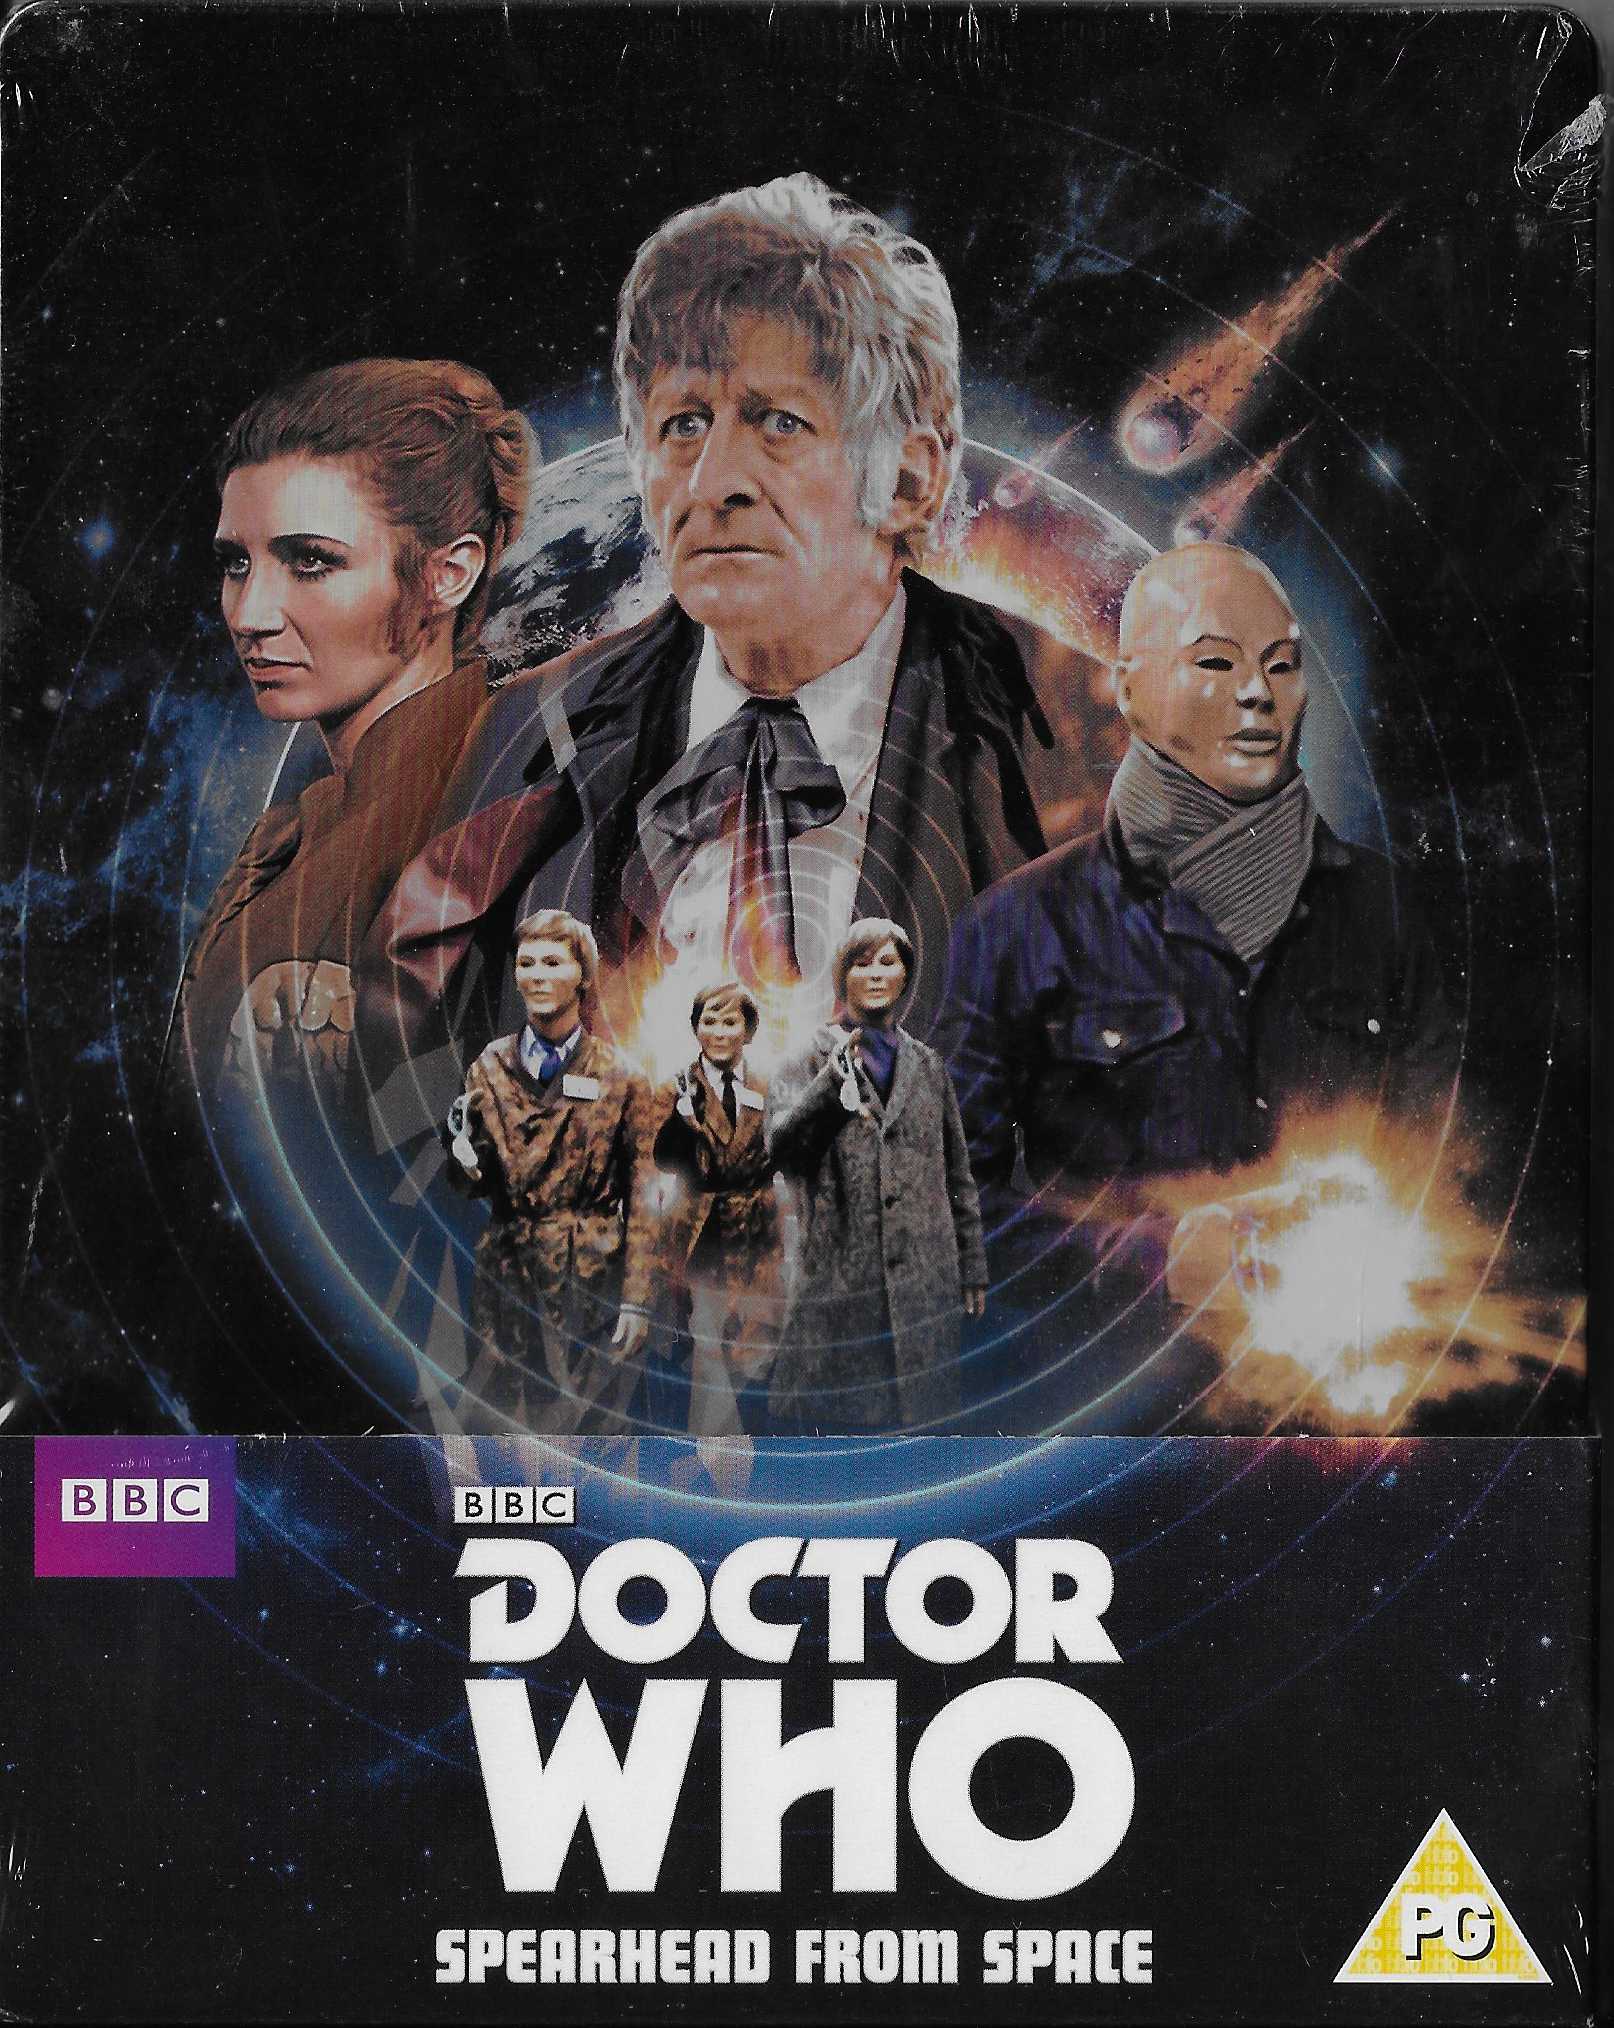 Picture of BBCBD 03444 Doctor Who - Spearhead from space by artist Robert Holmes from the BBC blu-rays - Records and Tapes library